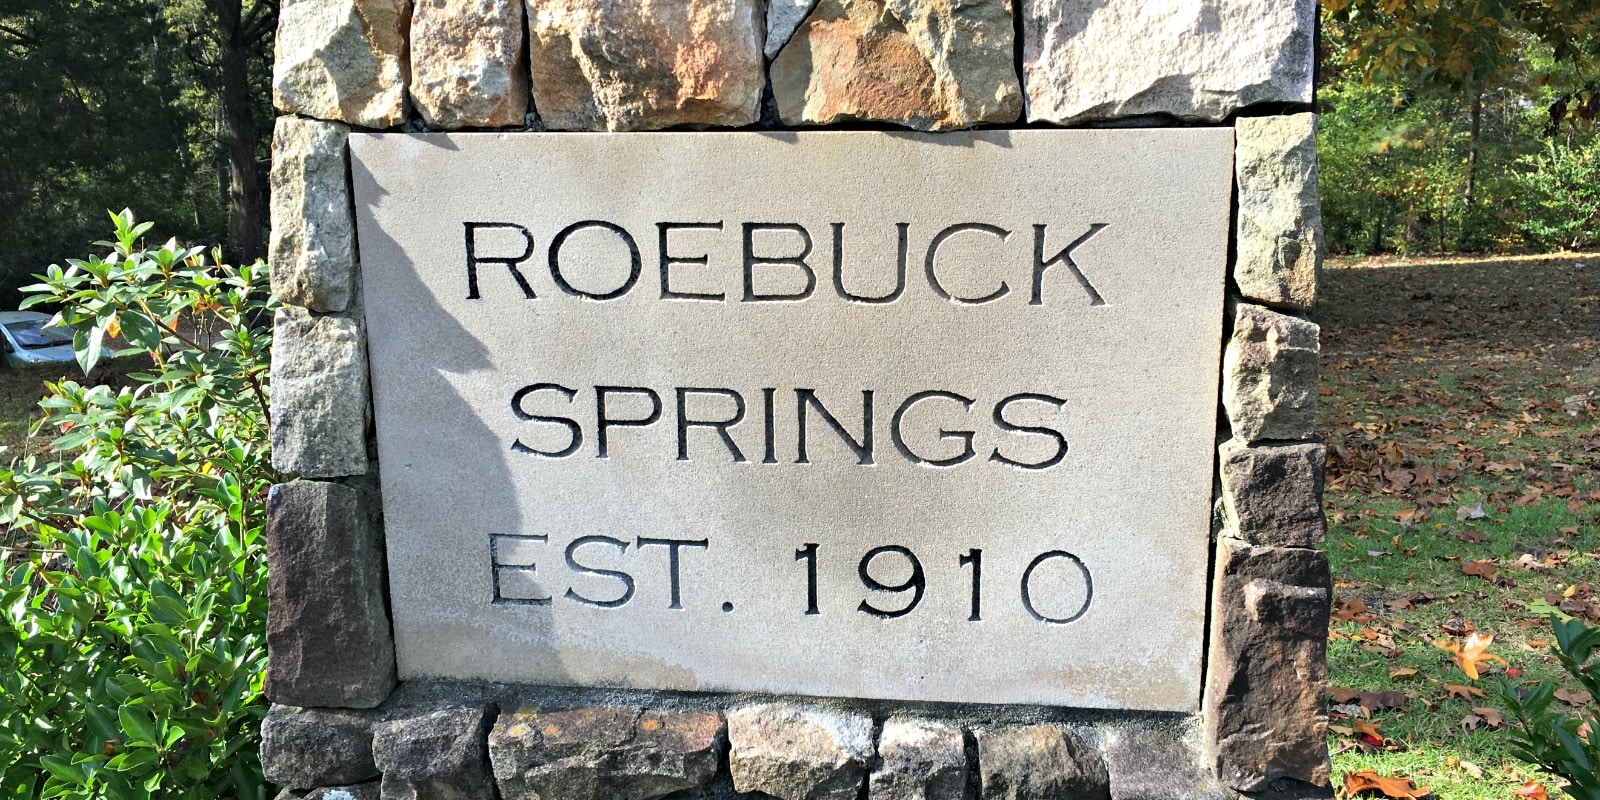 Stone marker for Roebuck Springs from 1910. Home of the Roebuck Springs potters.